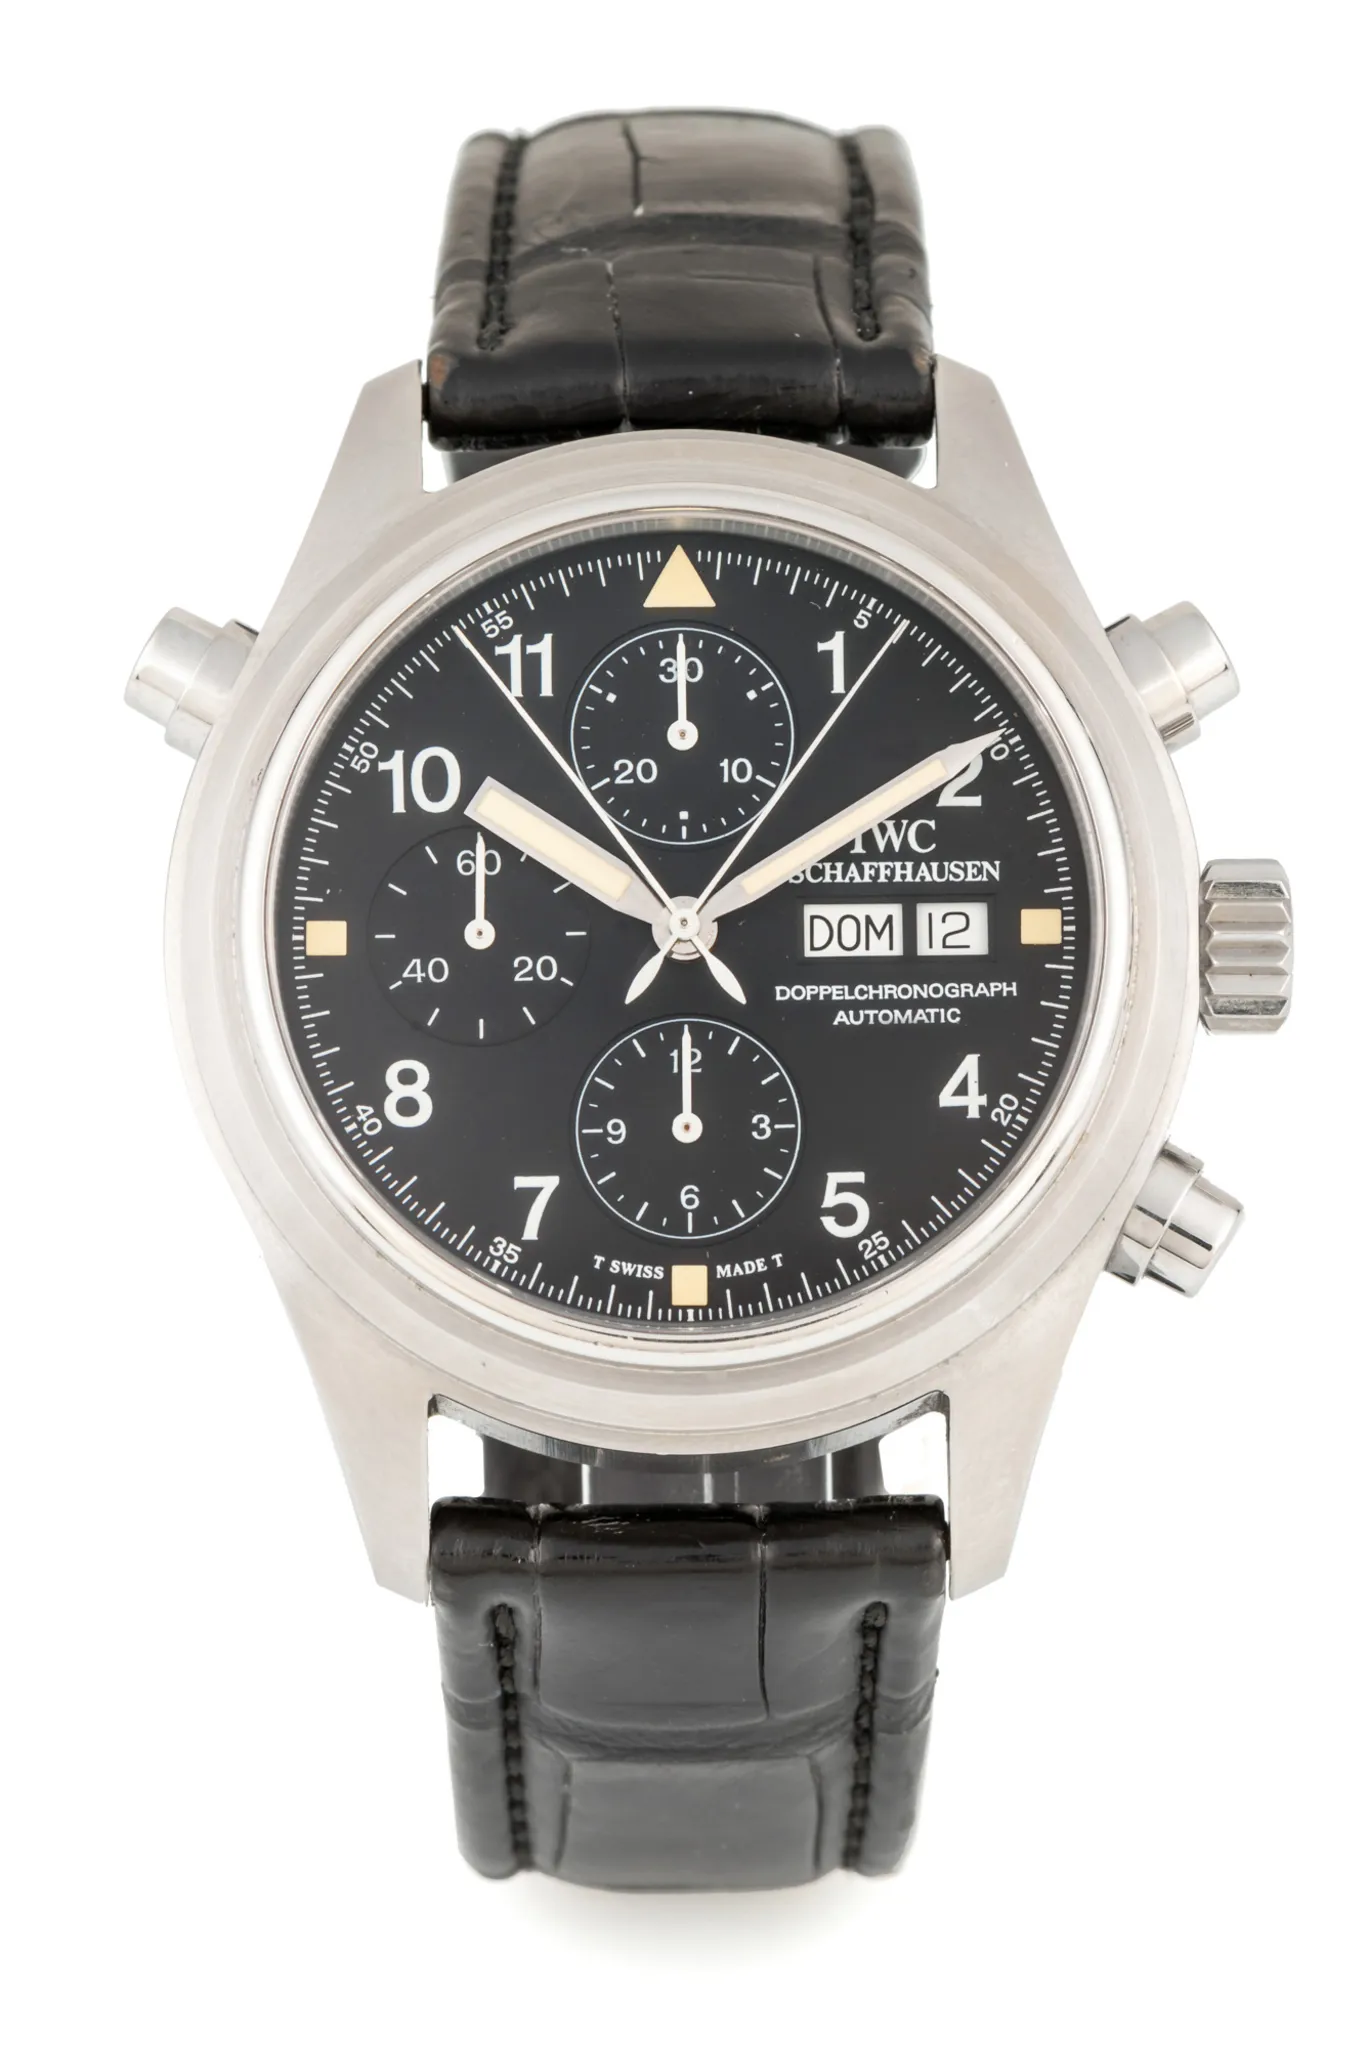 IWC Doppelchronograph 3713 42mm Stainless steel signed